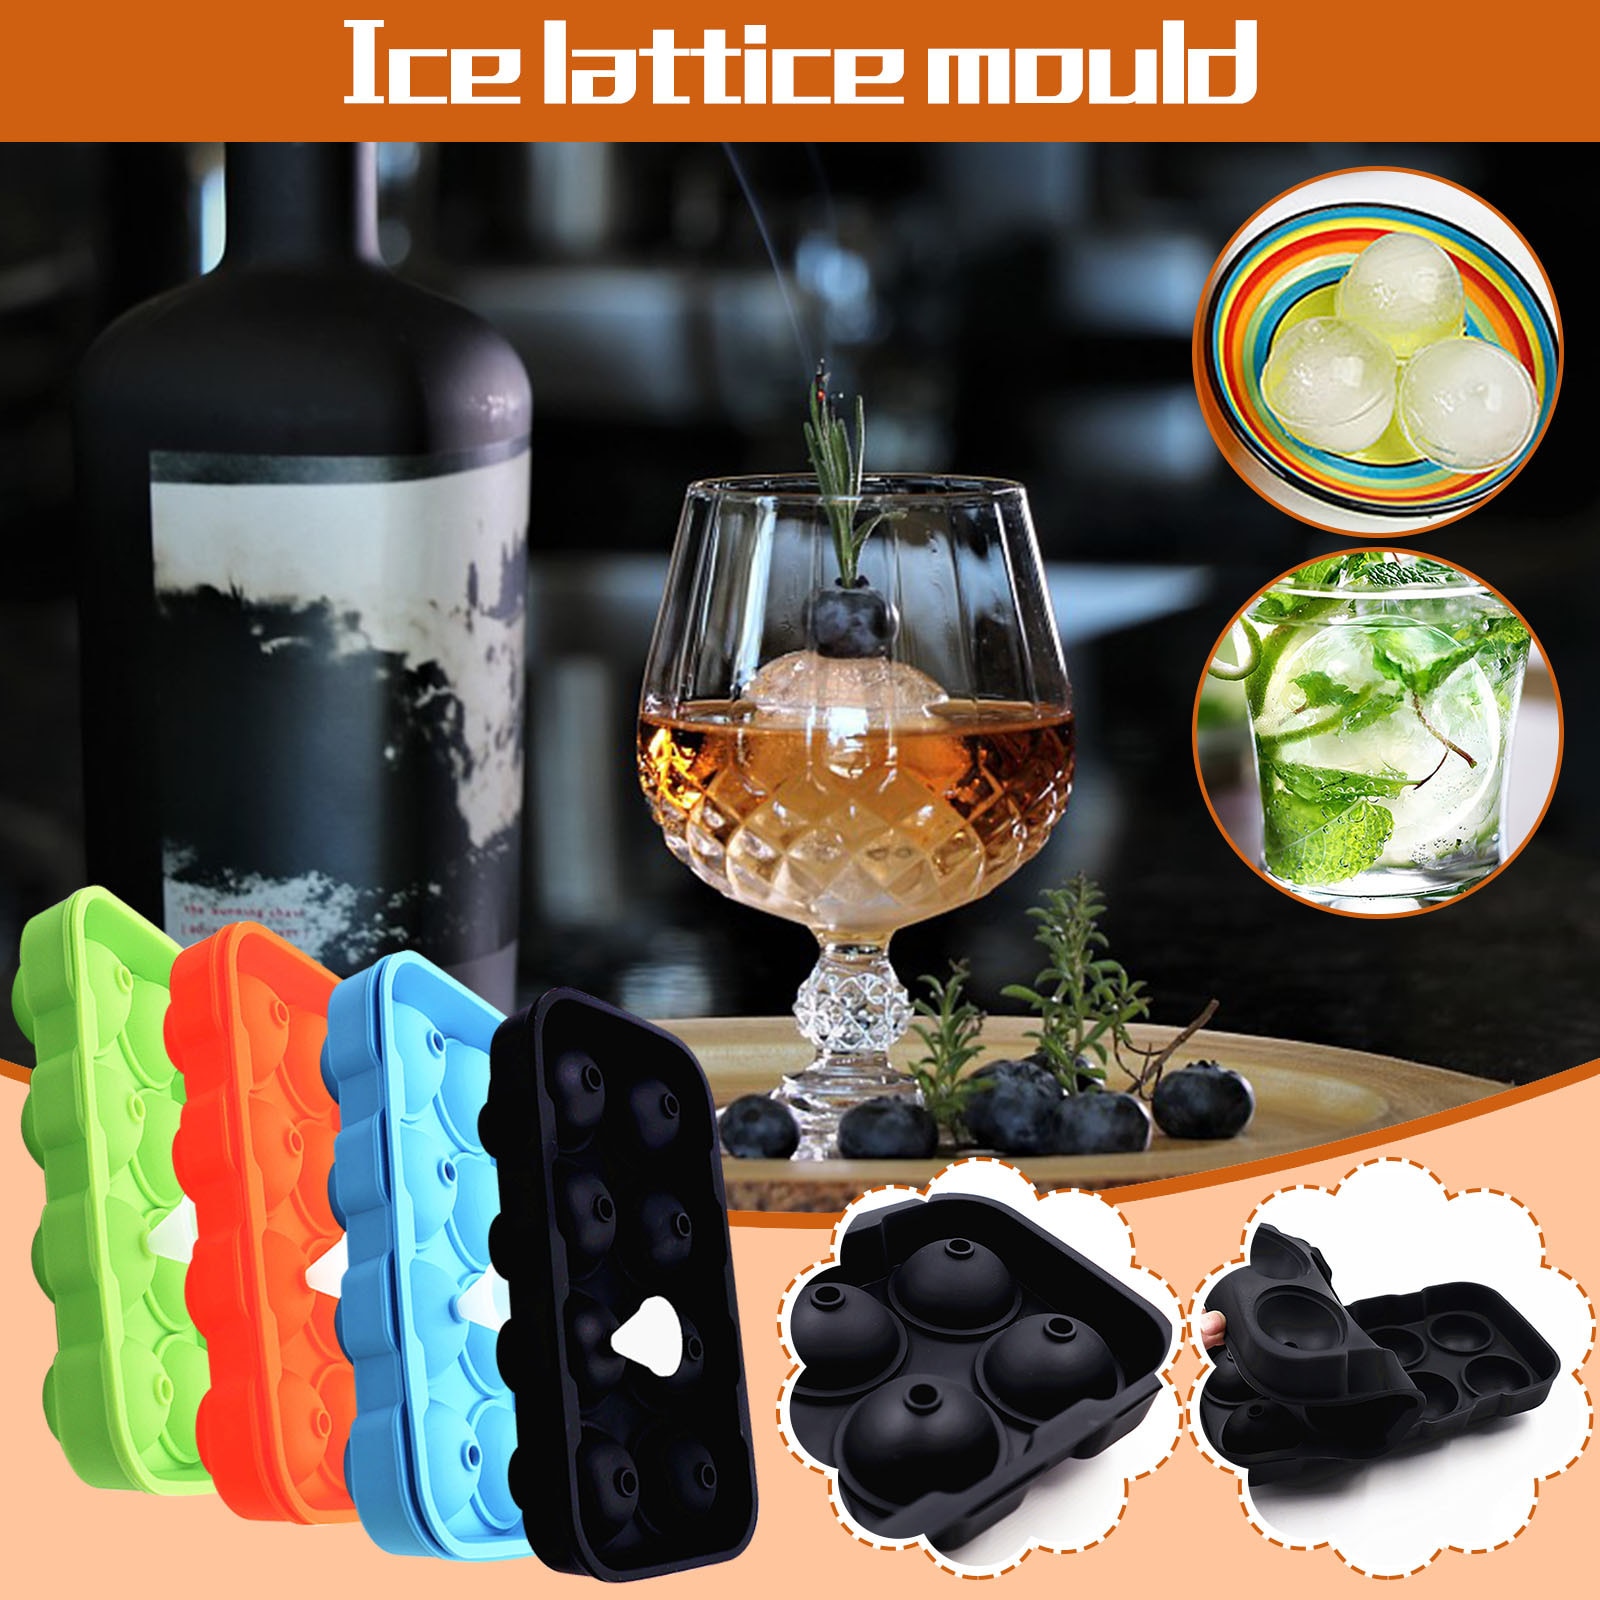 2021 New Large Size 8 Ice Ball Molds DSlicone Ice Tray Molds Whiskey Silicone Ice Making Molds For Party Kitchen Tools 1PC